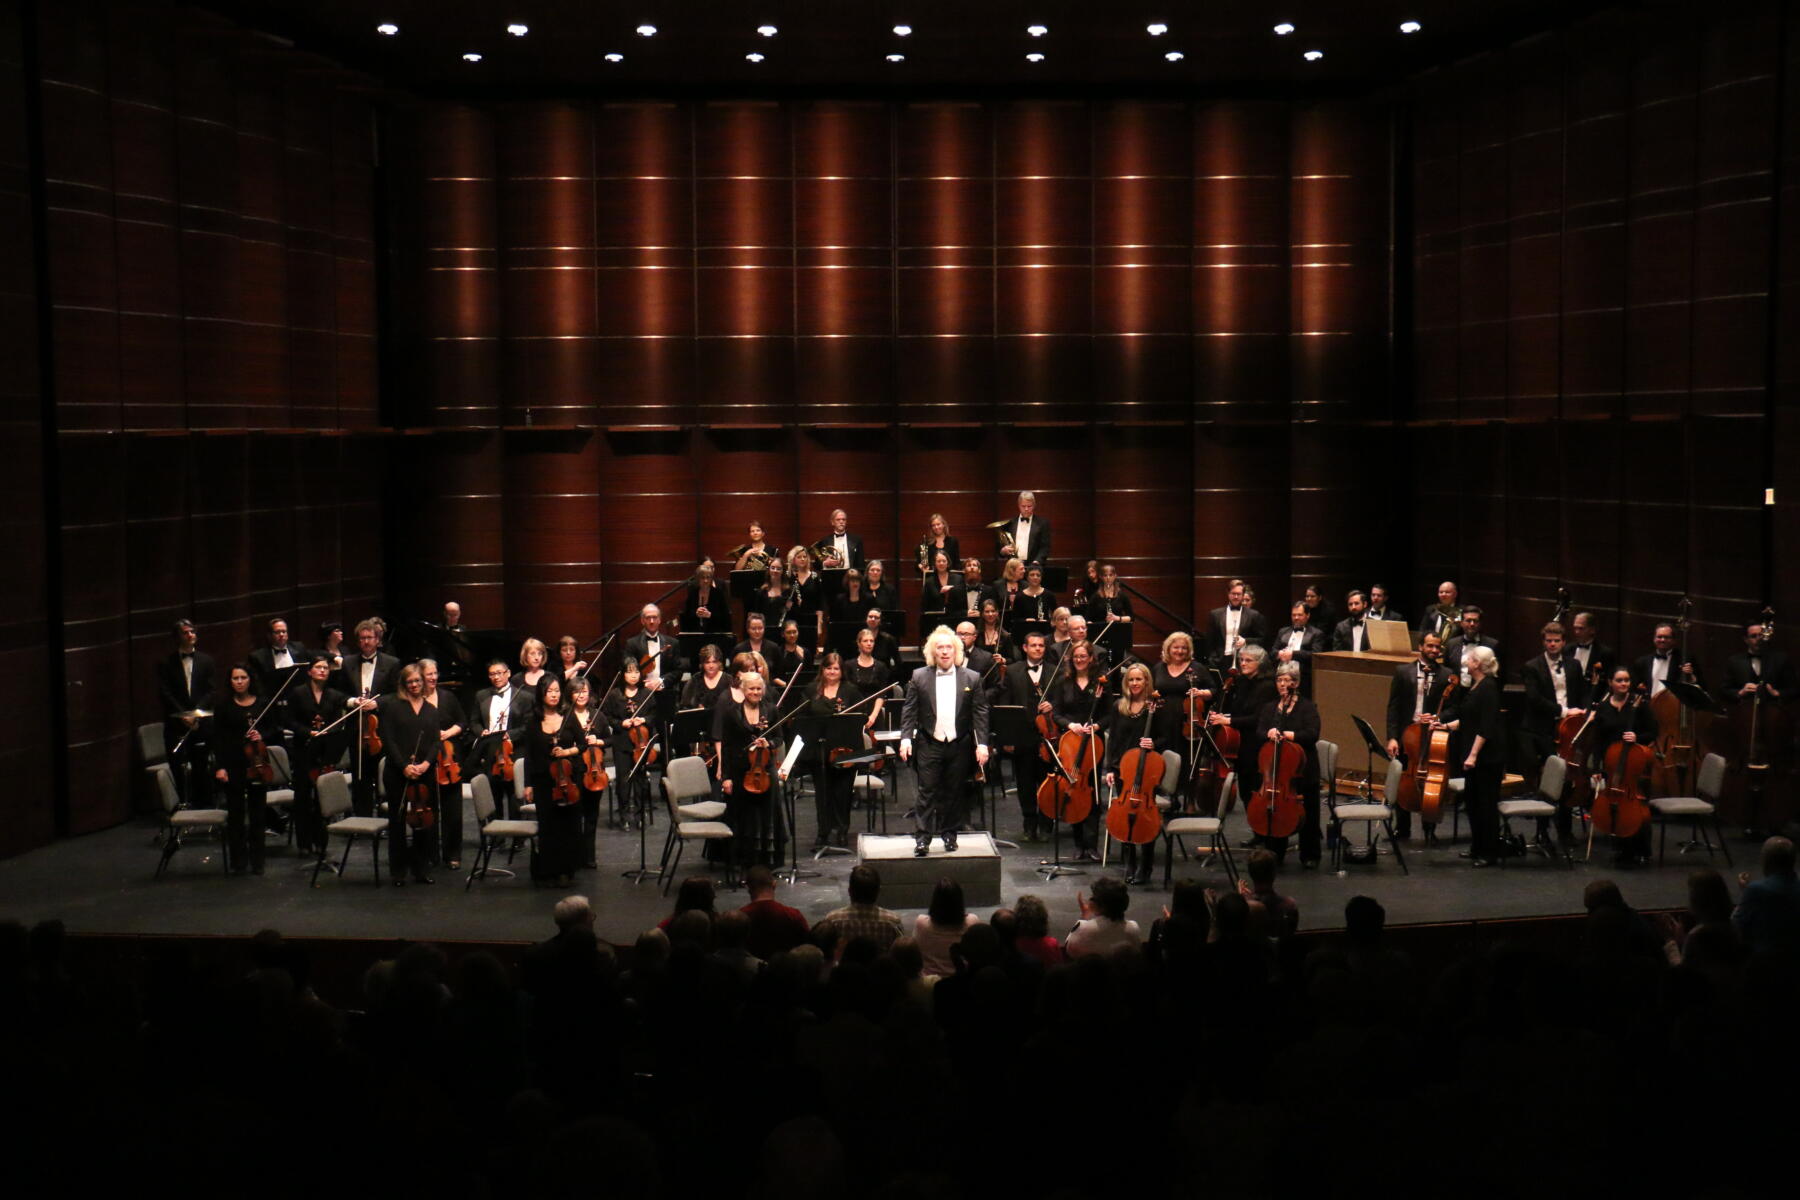 Muspratt and NP take bow. Photo courtesy of the McAninch Arts Center.